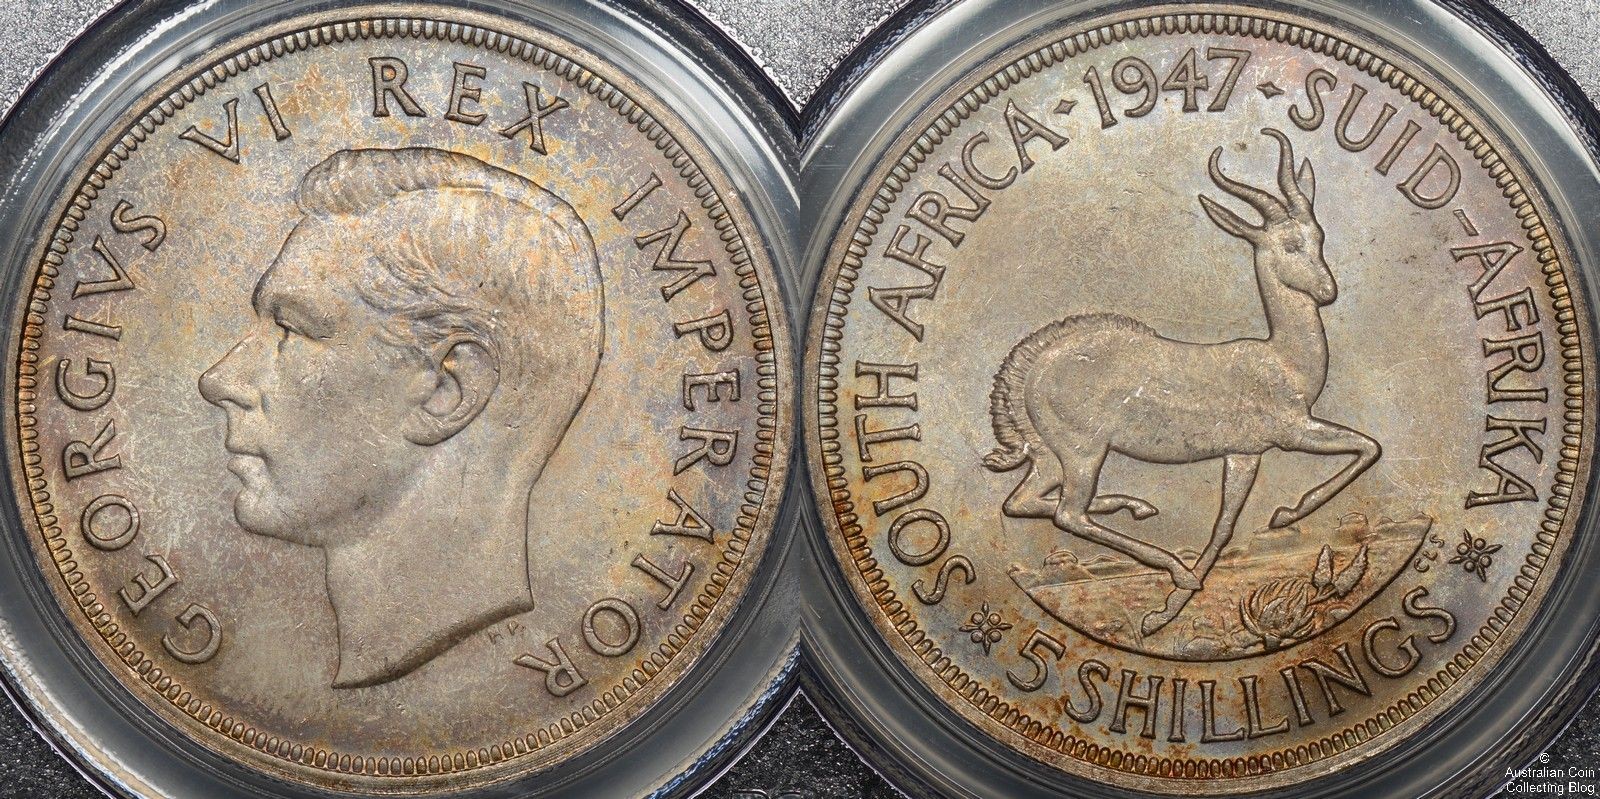 South Africa 1947 5 Shillings PCGS MS65 | Our Coin Catalog